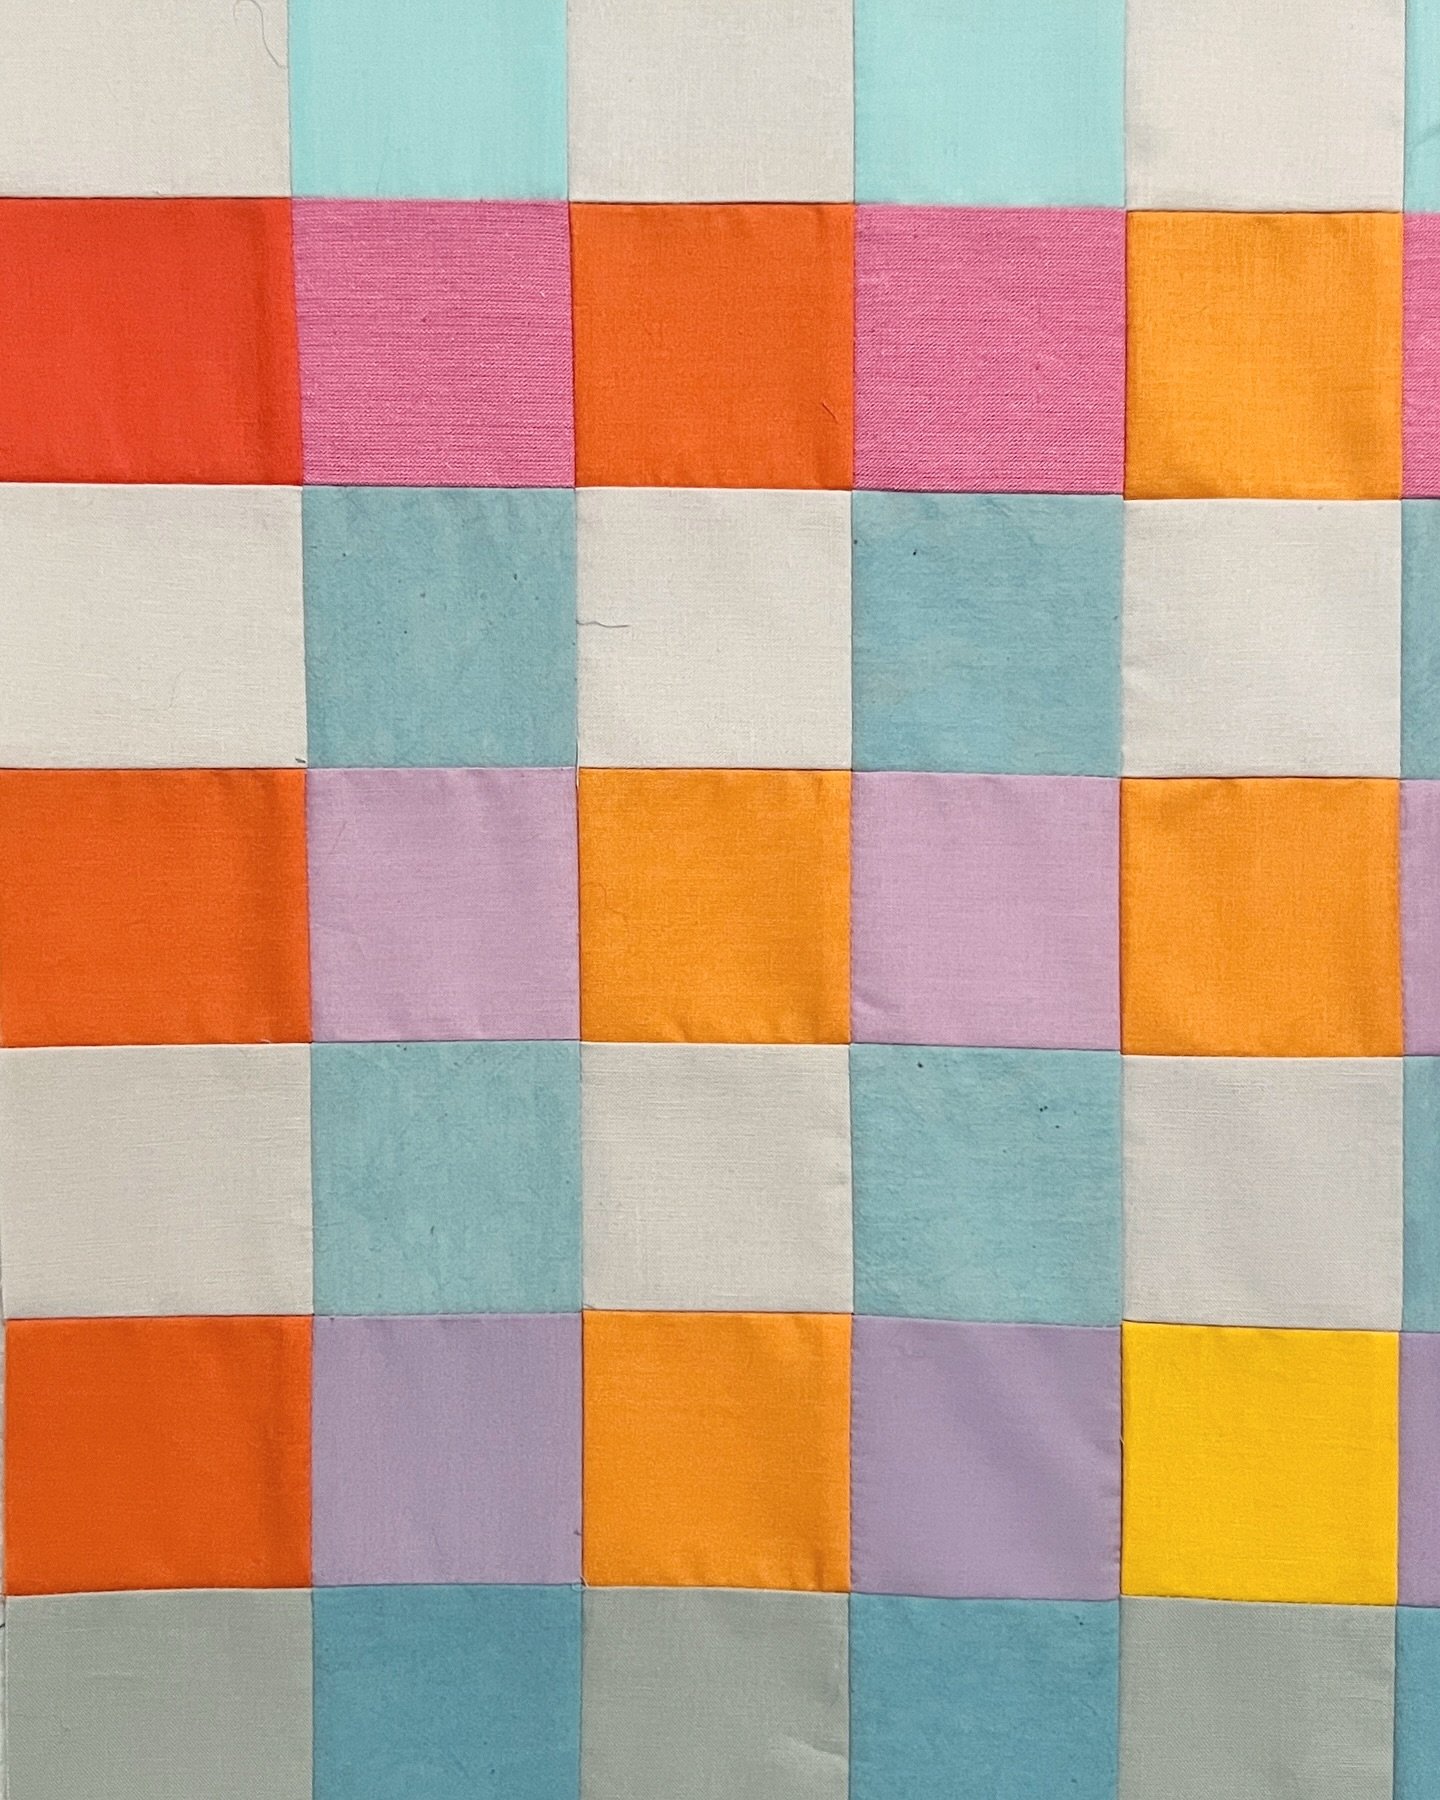 Playing with color.

#colorforquilters #modernquilt #interactionofcolor #quiltersofinstagram #quilttherainbow